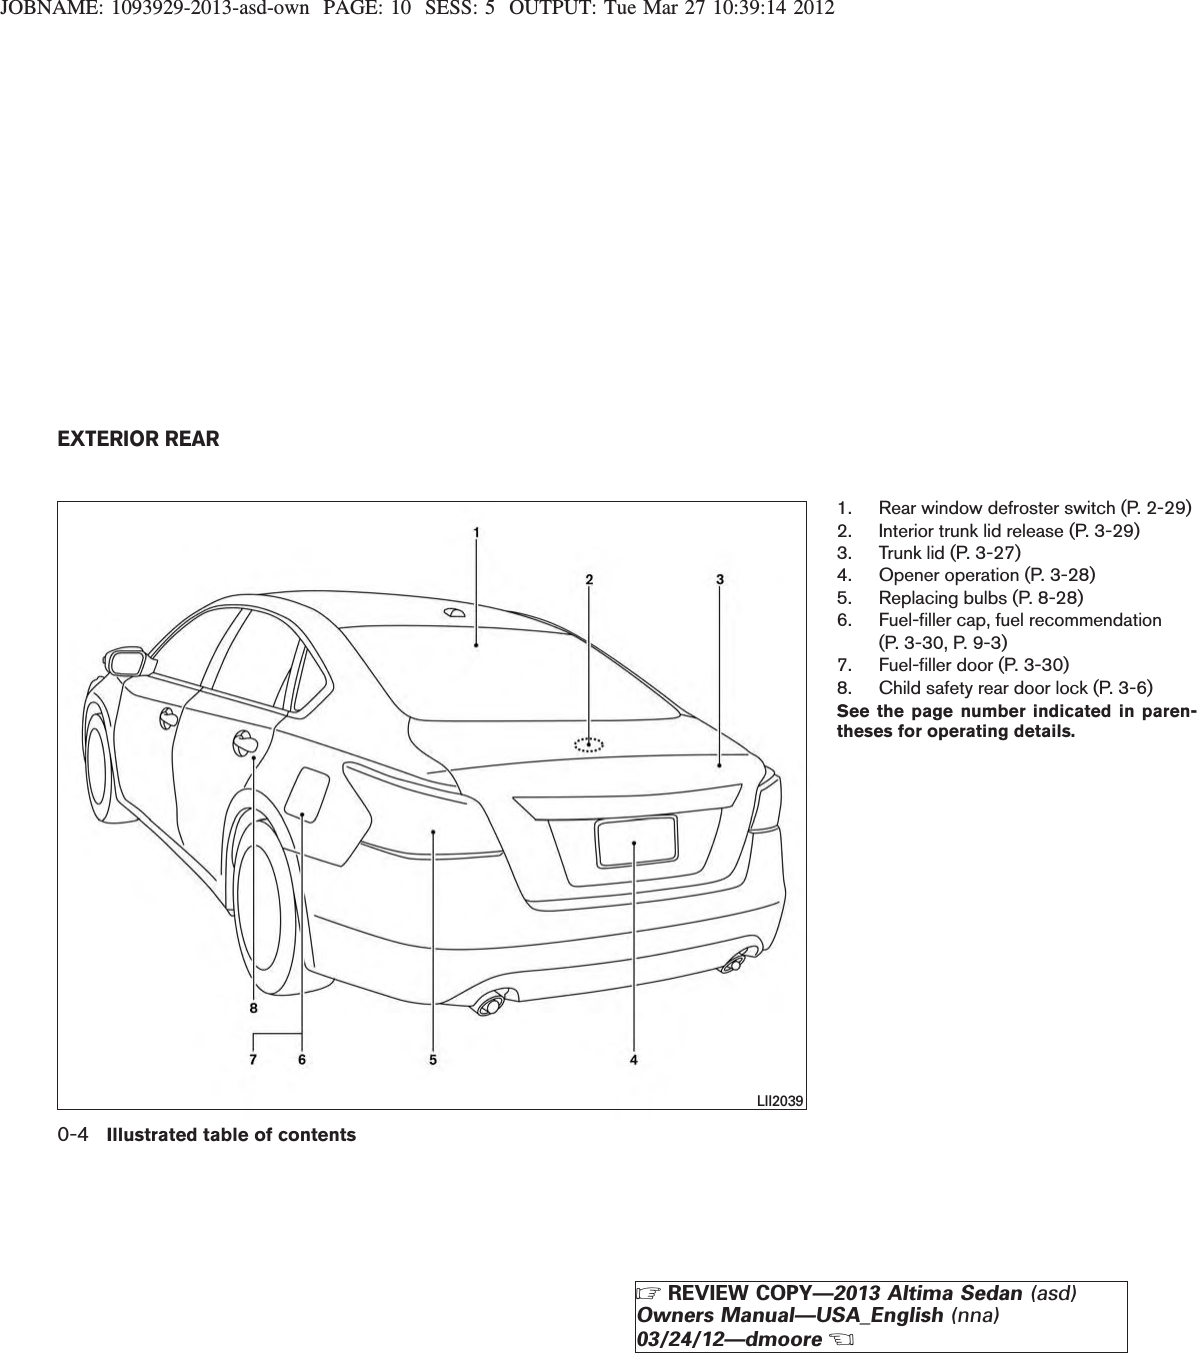 JOBNAME: 1093929-2013-asd-own PAGE: 10 SESS: 5 OUTPUT: Tue Mar 27 10:39:14 20121. Rear window defroster switch (P. 2-29)2. Interior trunk lid release (P. 3-29)3. Trunk lid (P. 3-27)4. Opener operation (P. 3-28)5. Replacing bulbs (P. 8-28)6. Fuel-filler cap, fuel recommendation(P. 3-30, P. 9-3)7. Fuel-filler door (P. 3-30)8. Child safety rear door lock (P. 3-6)See the page number indicated in paren-theses for operating details.LII2039EXTERIOR REAR0-4 Illustrated table of contentsZREVIEW COPY—2013 Altima Sedan (asd)Owners Manual—USA_English (nna)03/24/12—dmooreX